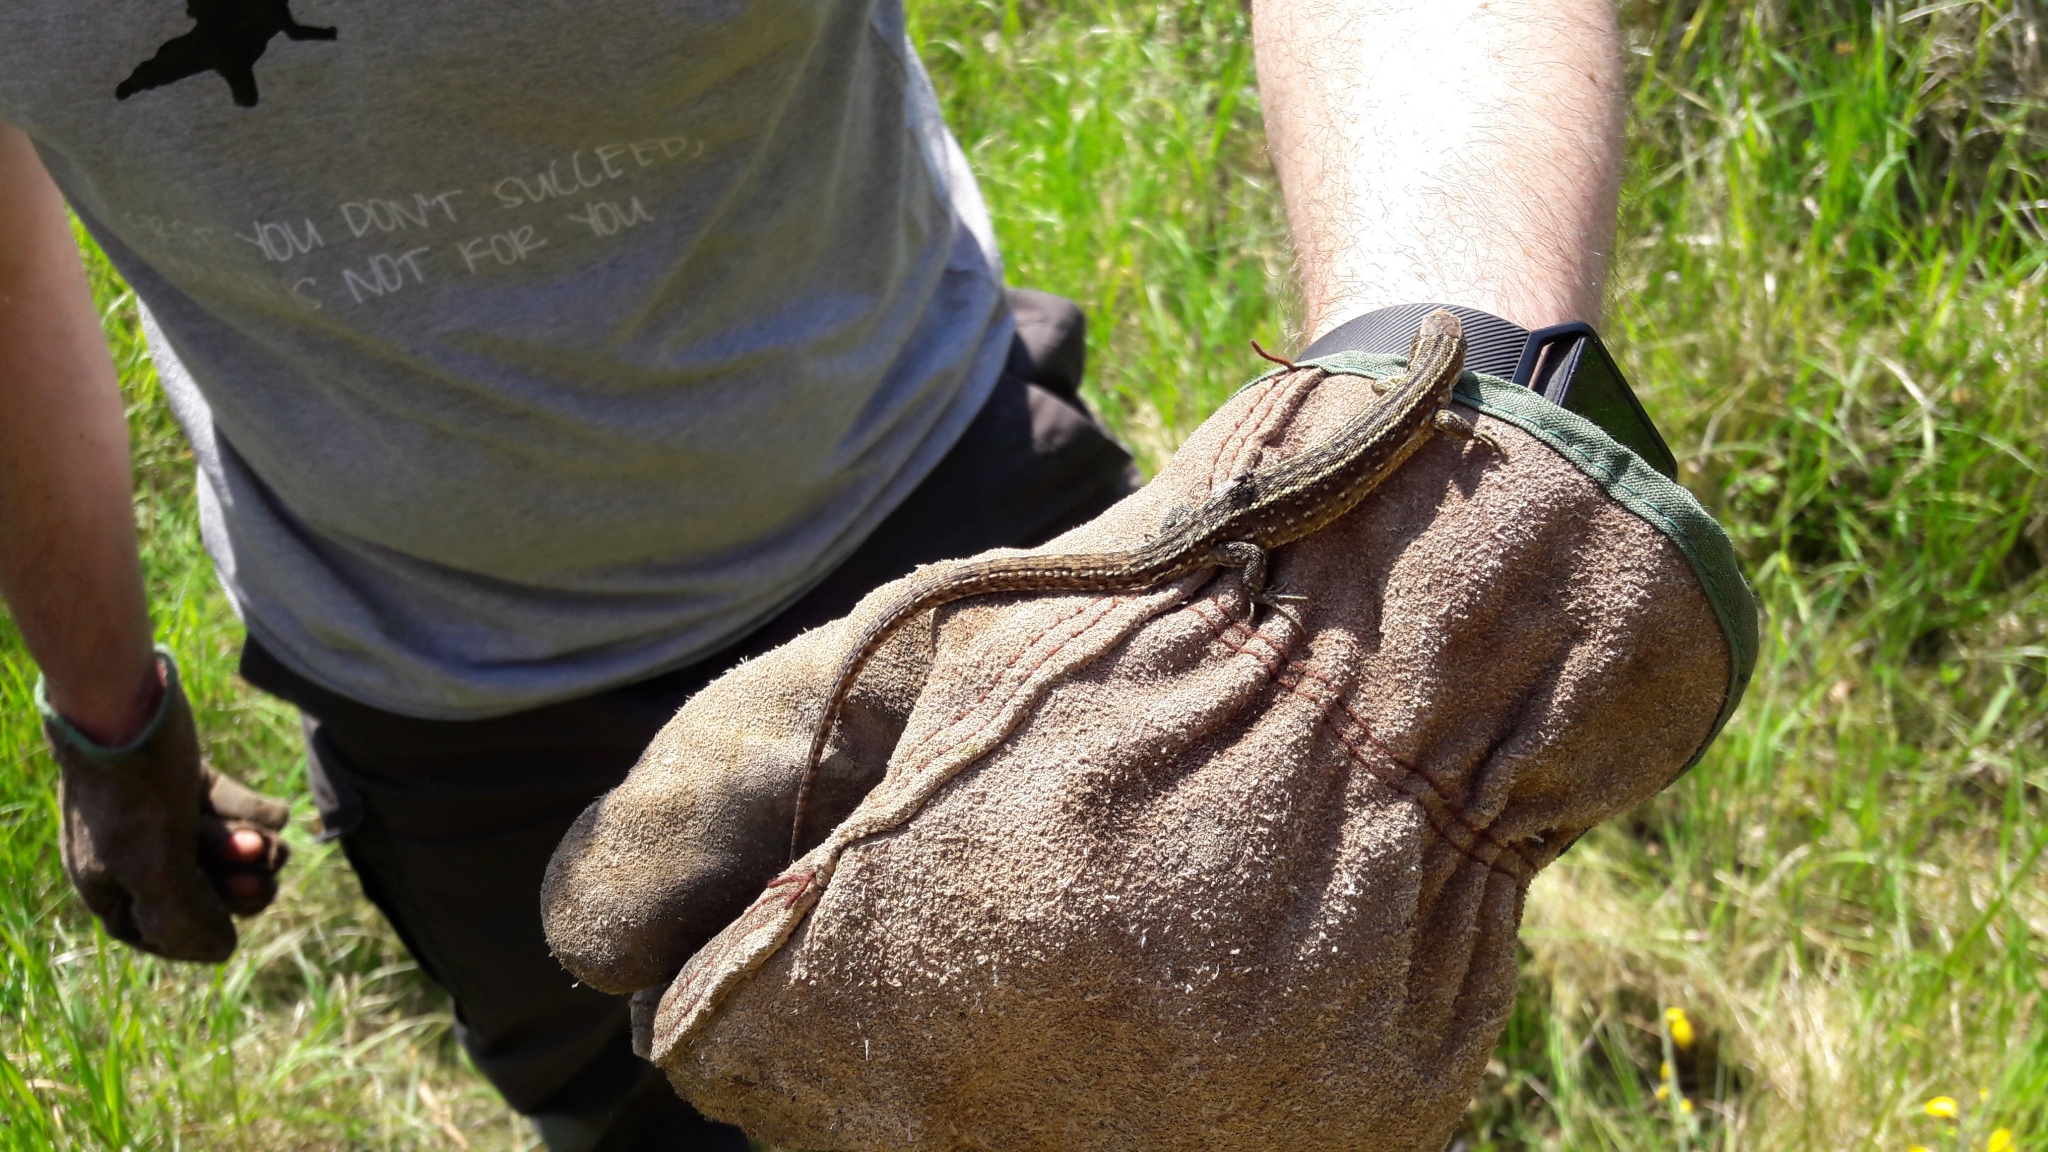 A photo from the FoTF Conservation Event - May 2018 - Open Day preparations at Mildenhall Mugwort Pits & Mildenhall Warren Lodge : A lizard on a volunteers glove